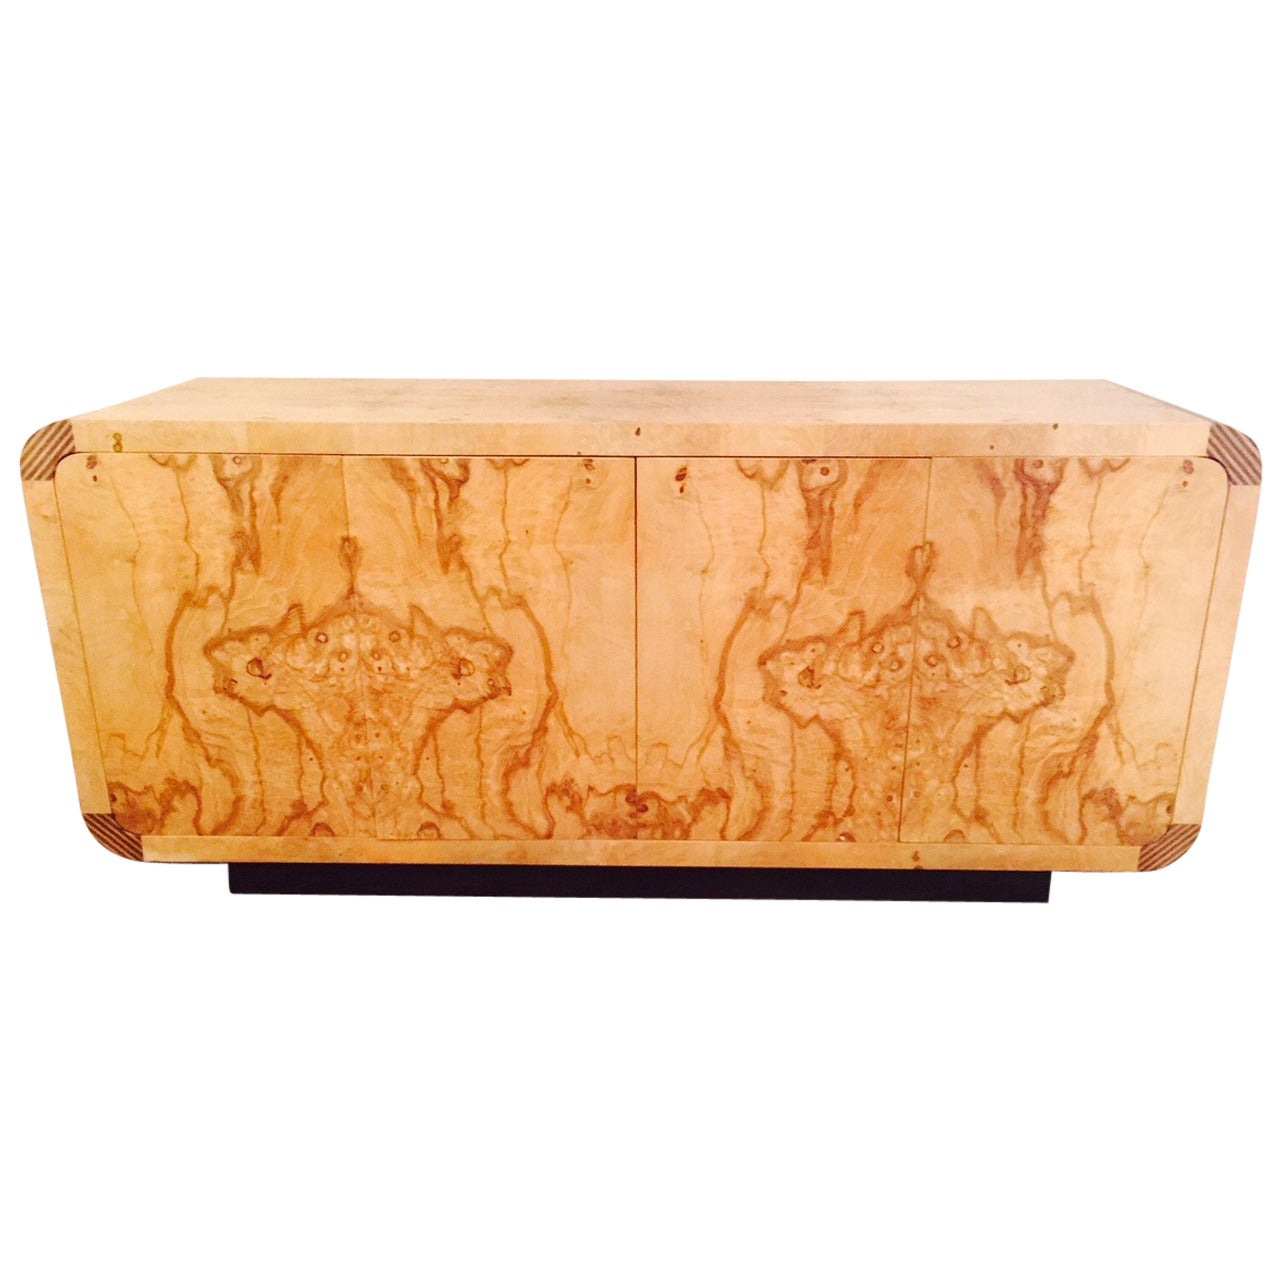 Burl Wood Credenza with Mixed Wood Corners